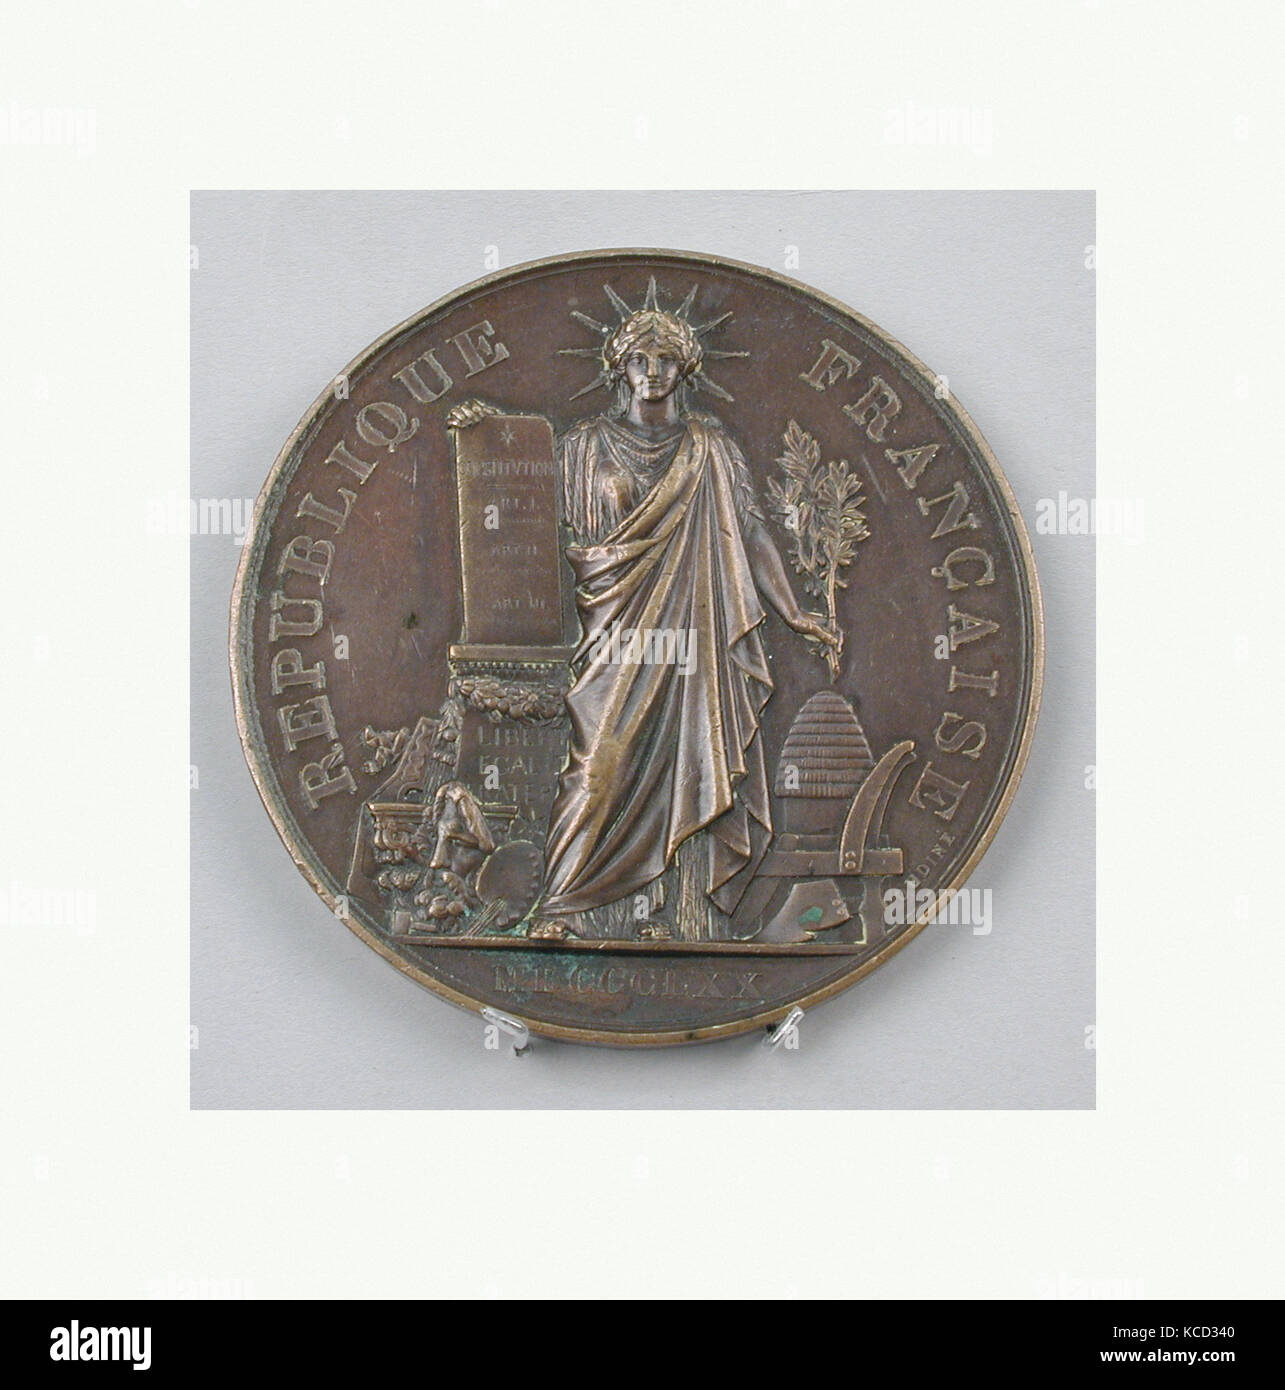 Medal Awarded to French Civilian Pigeon-Keepers (“Colombiers civils”), Medalist: Eugène-André Oudiné, 1870 Stock Photo